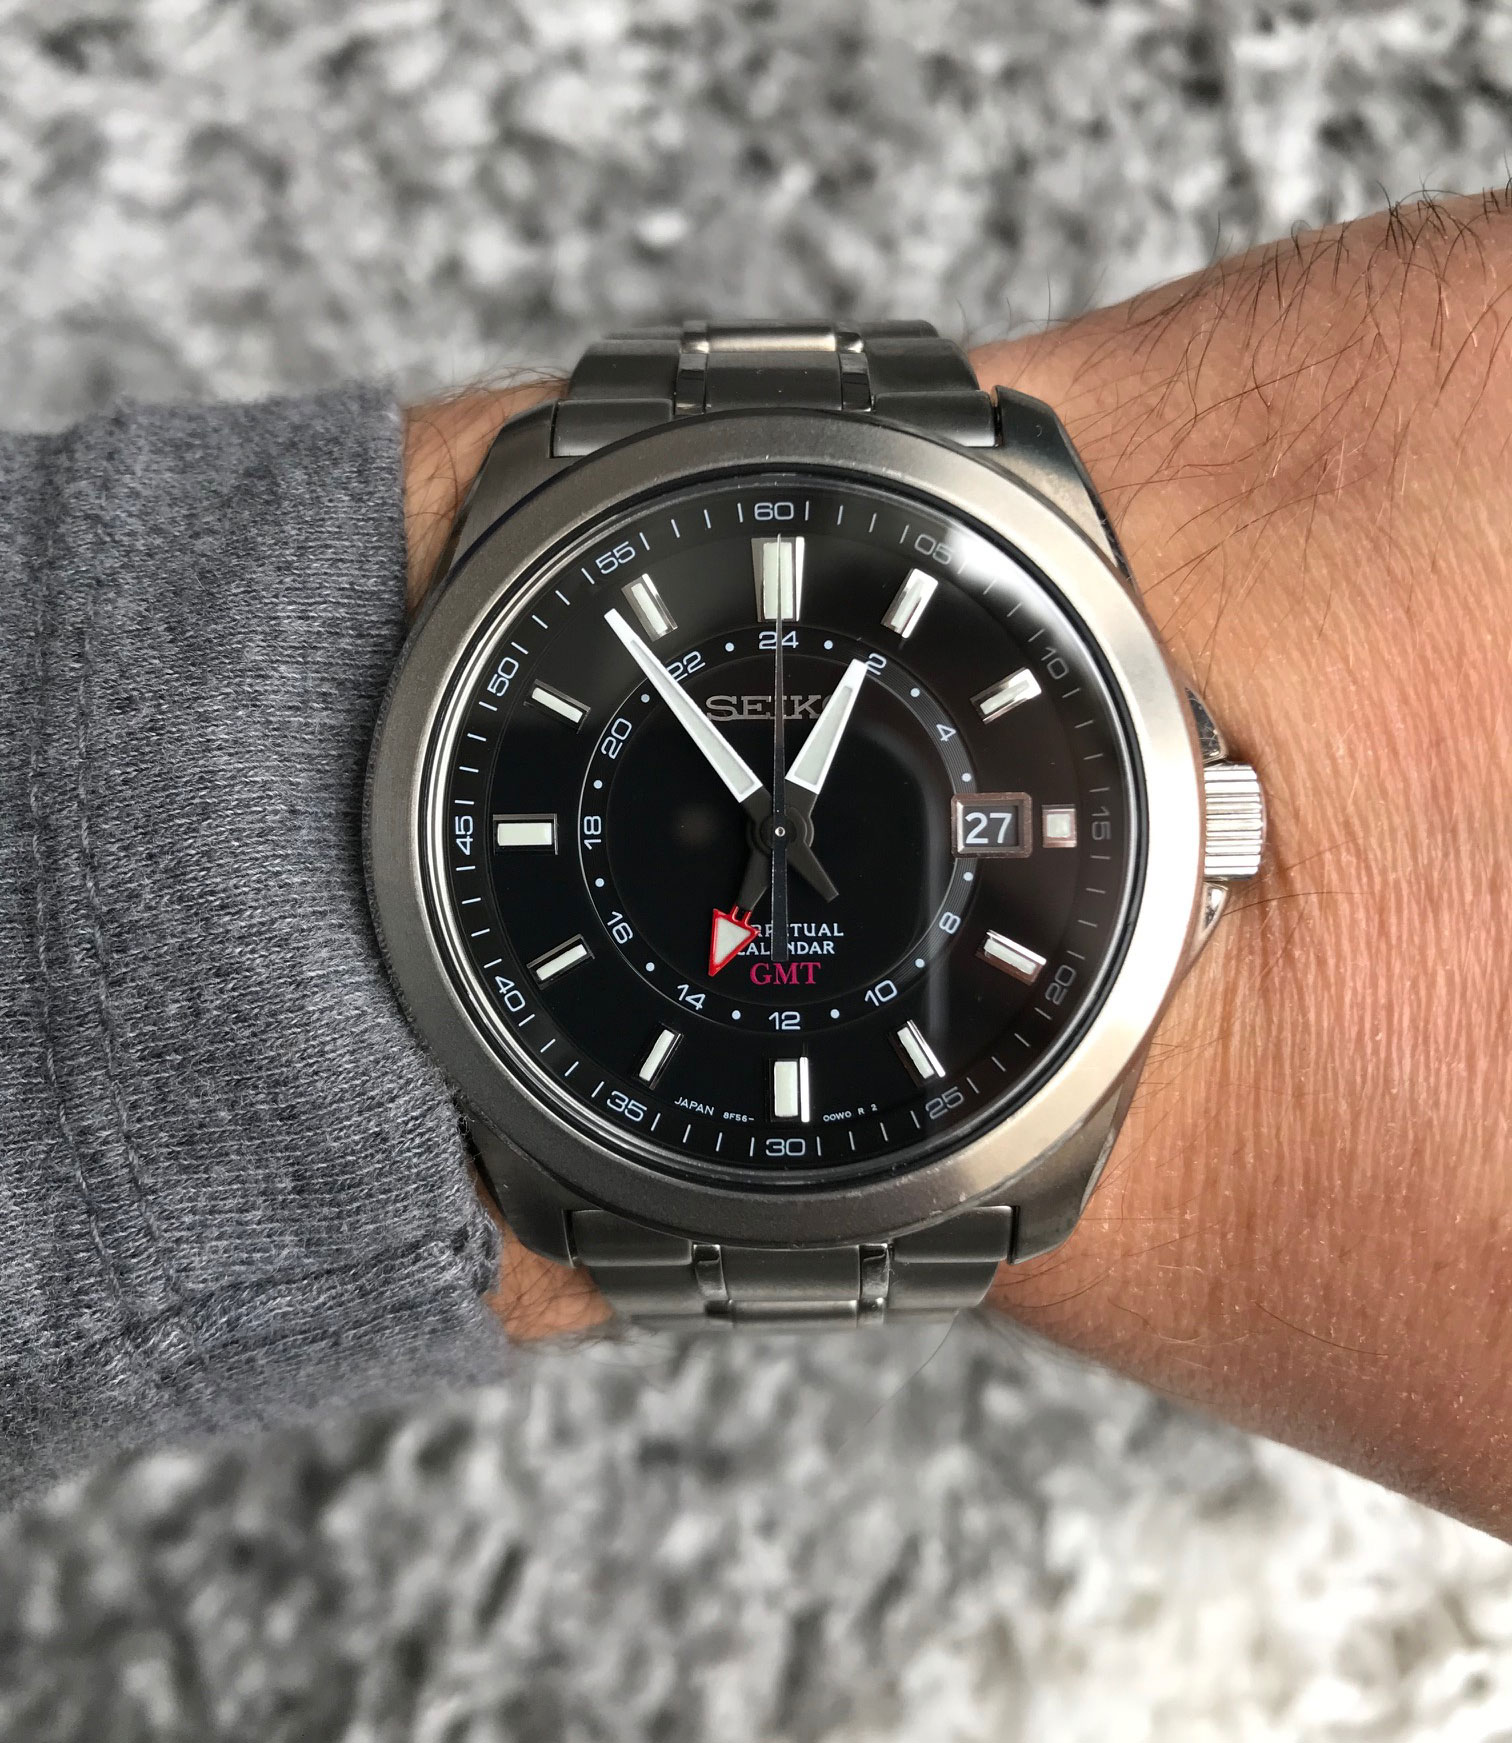 Owner Review: Seiko SBQJ015 - Quartz Watch Packed with Features